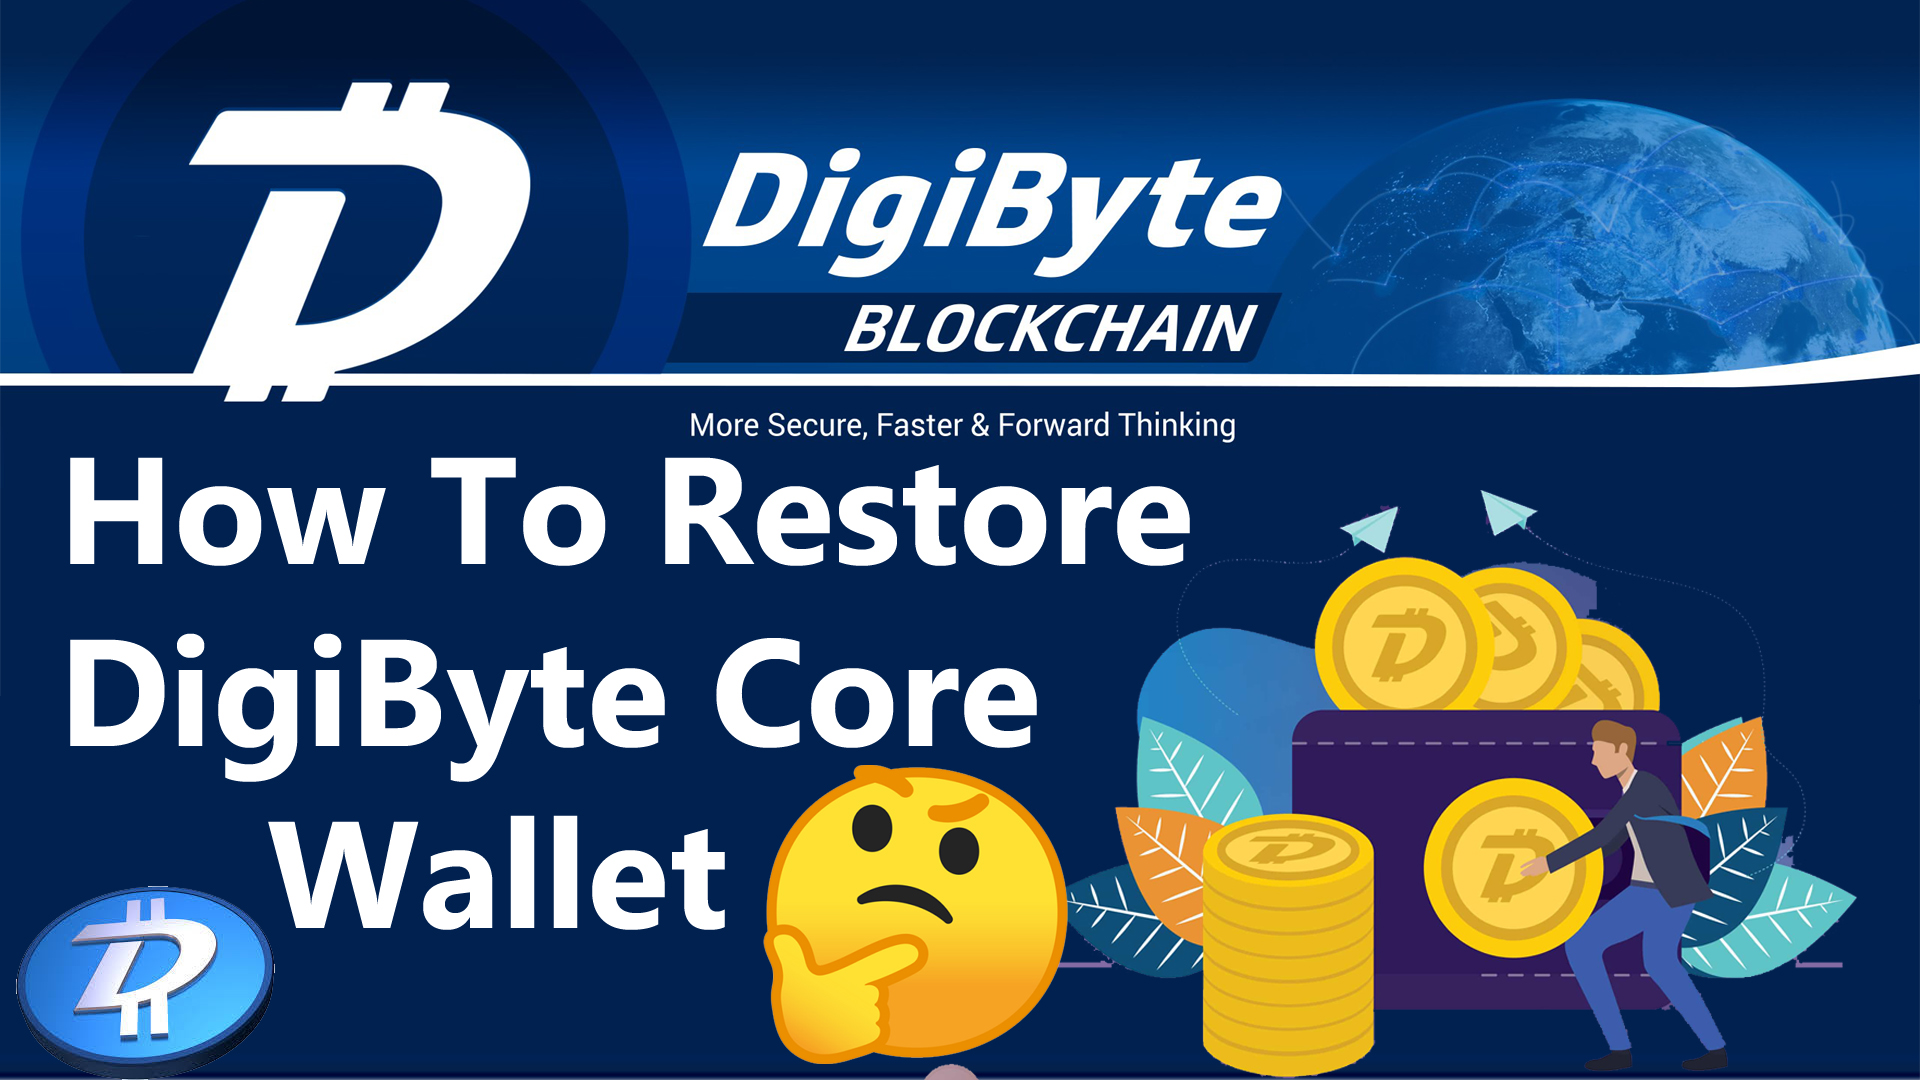 How To Restore DigiByte Core Wallet | Recover DigiByte ...